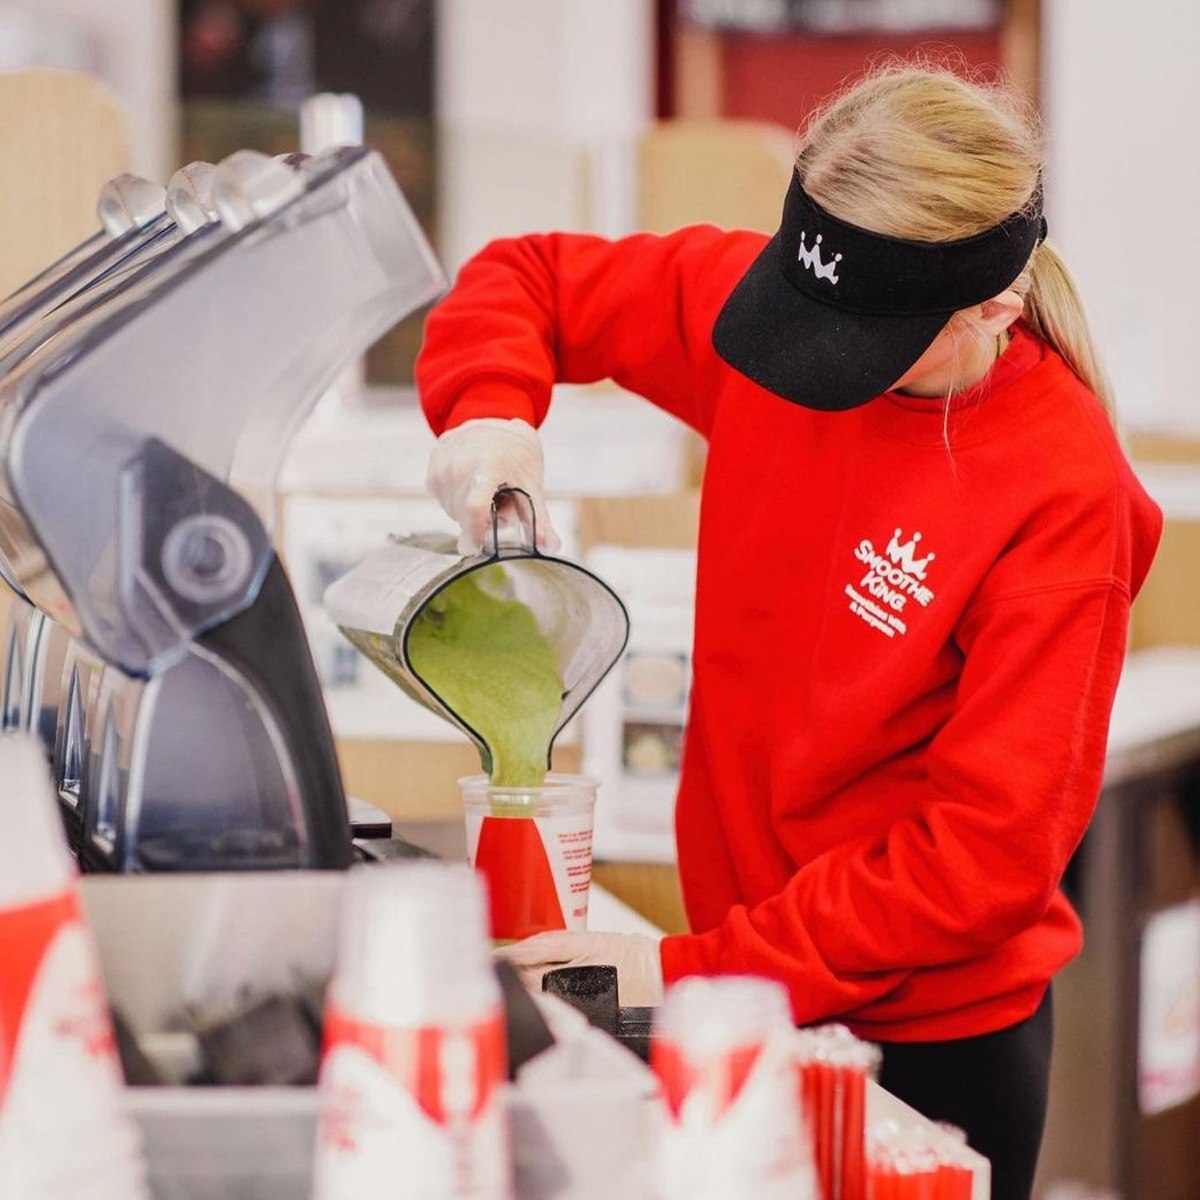 Smoothie King employee filling cup with a green smoothie